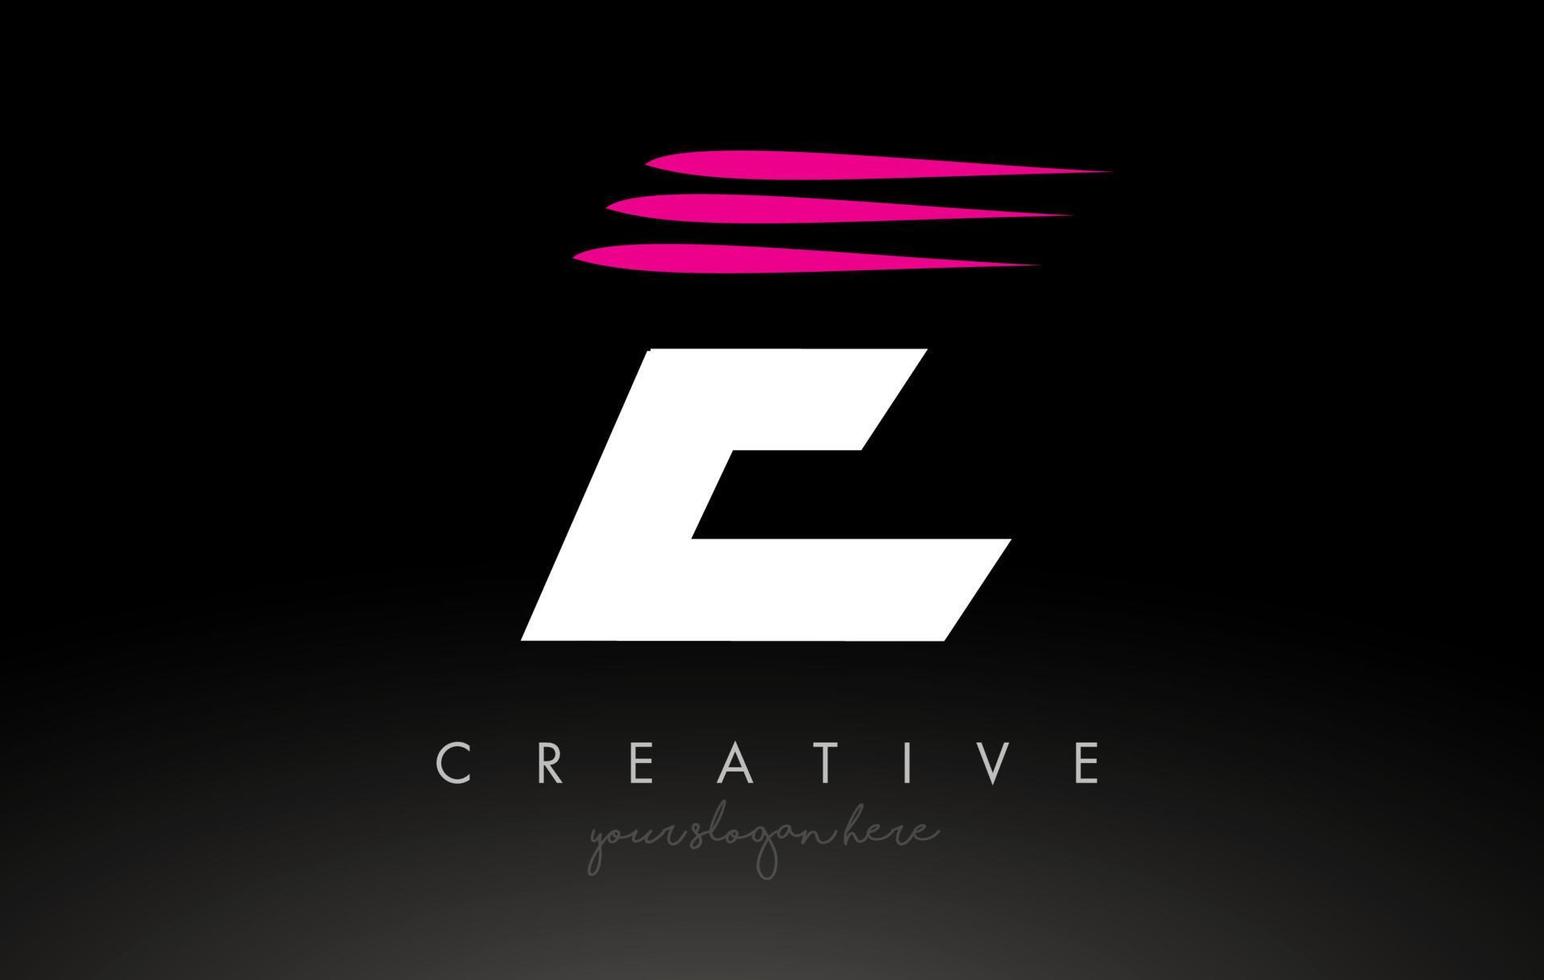 E White and Pink Swoosh Letter Logo Letter Design with Creative Concept Vector Idea